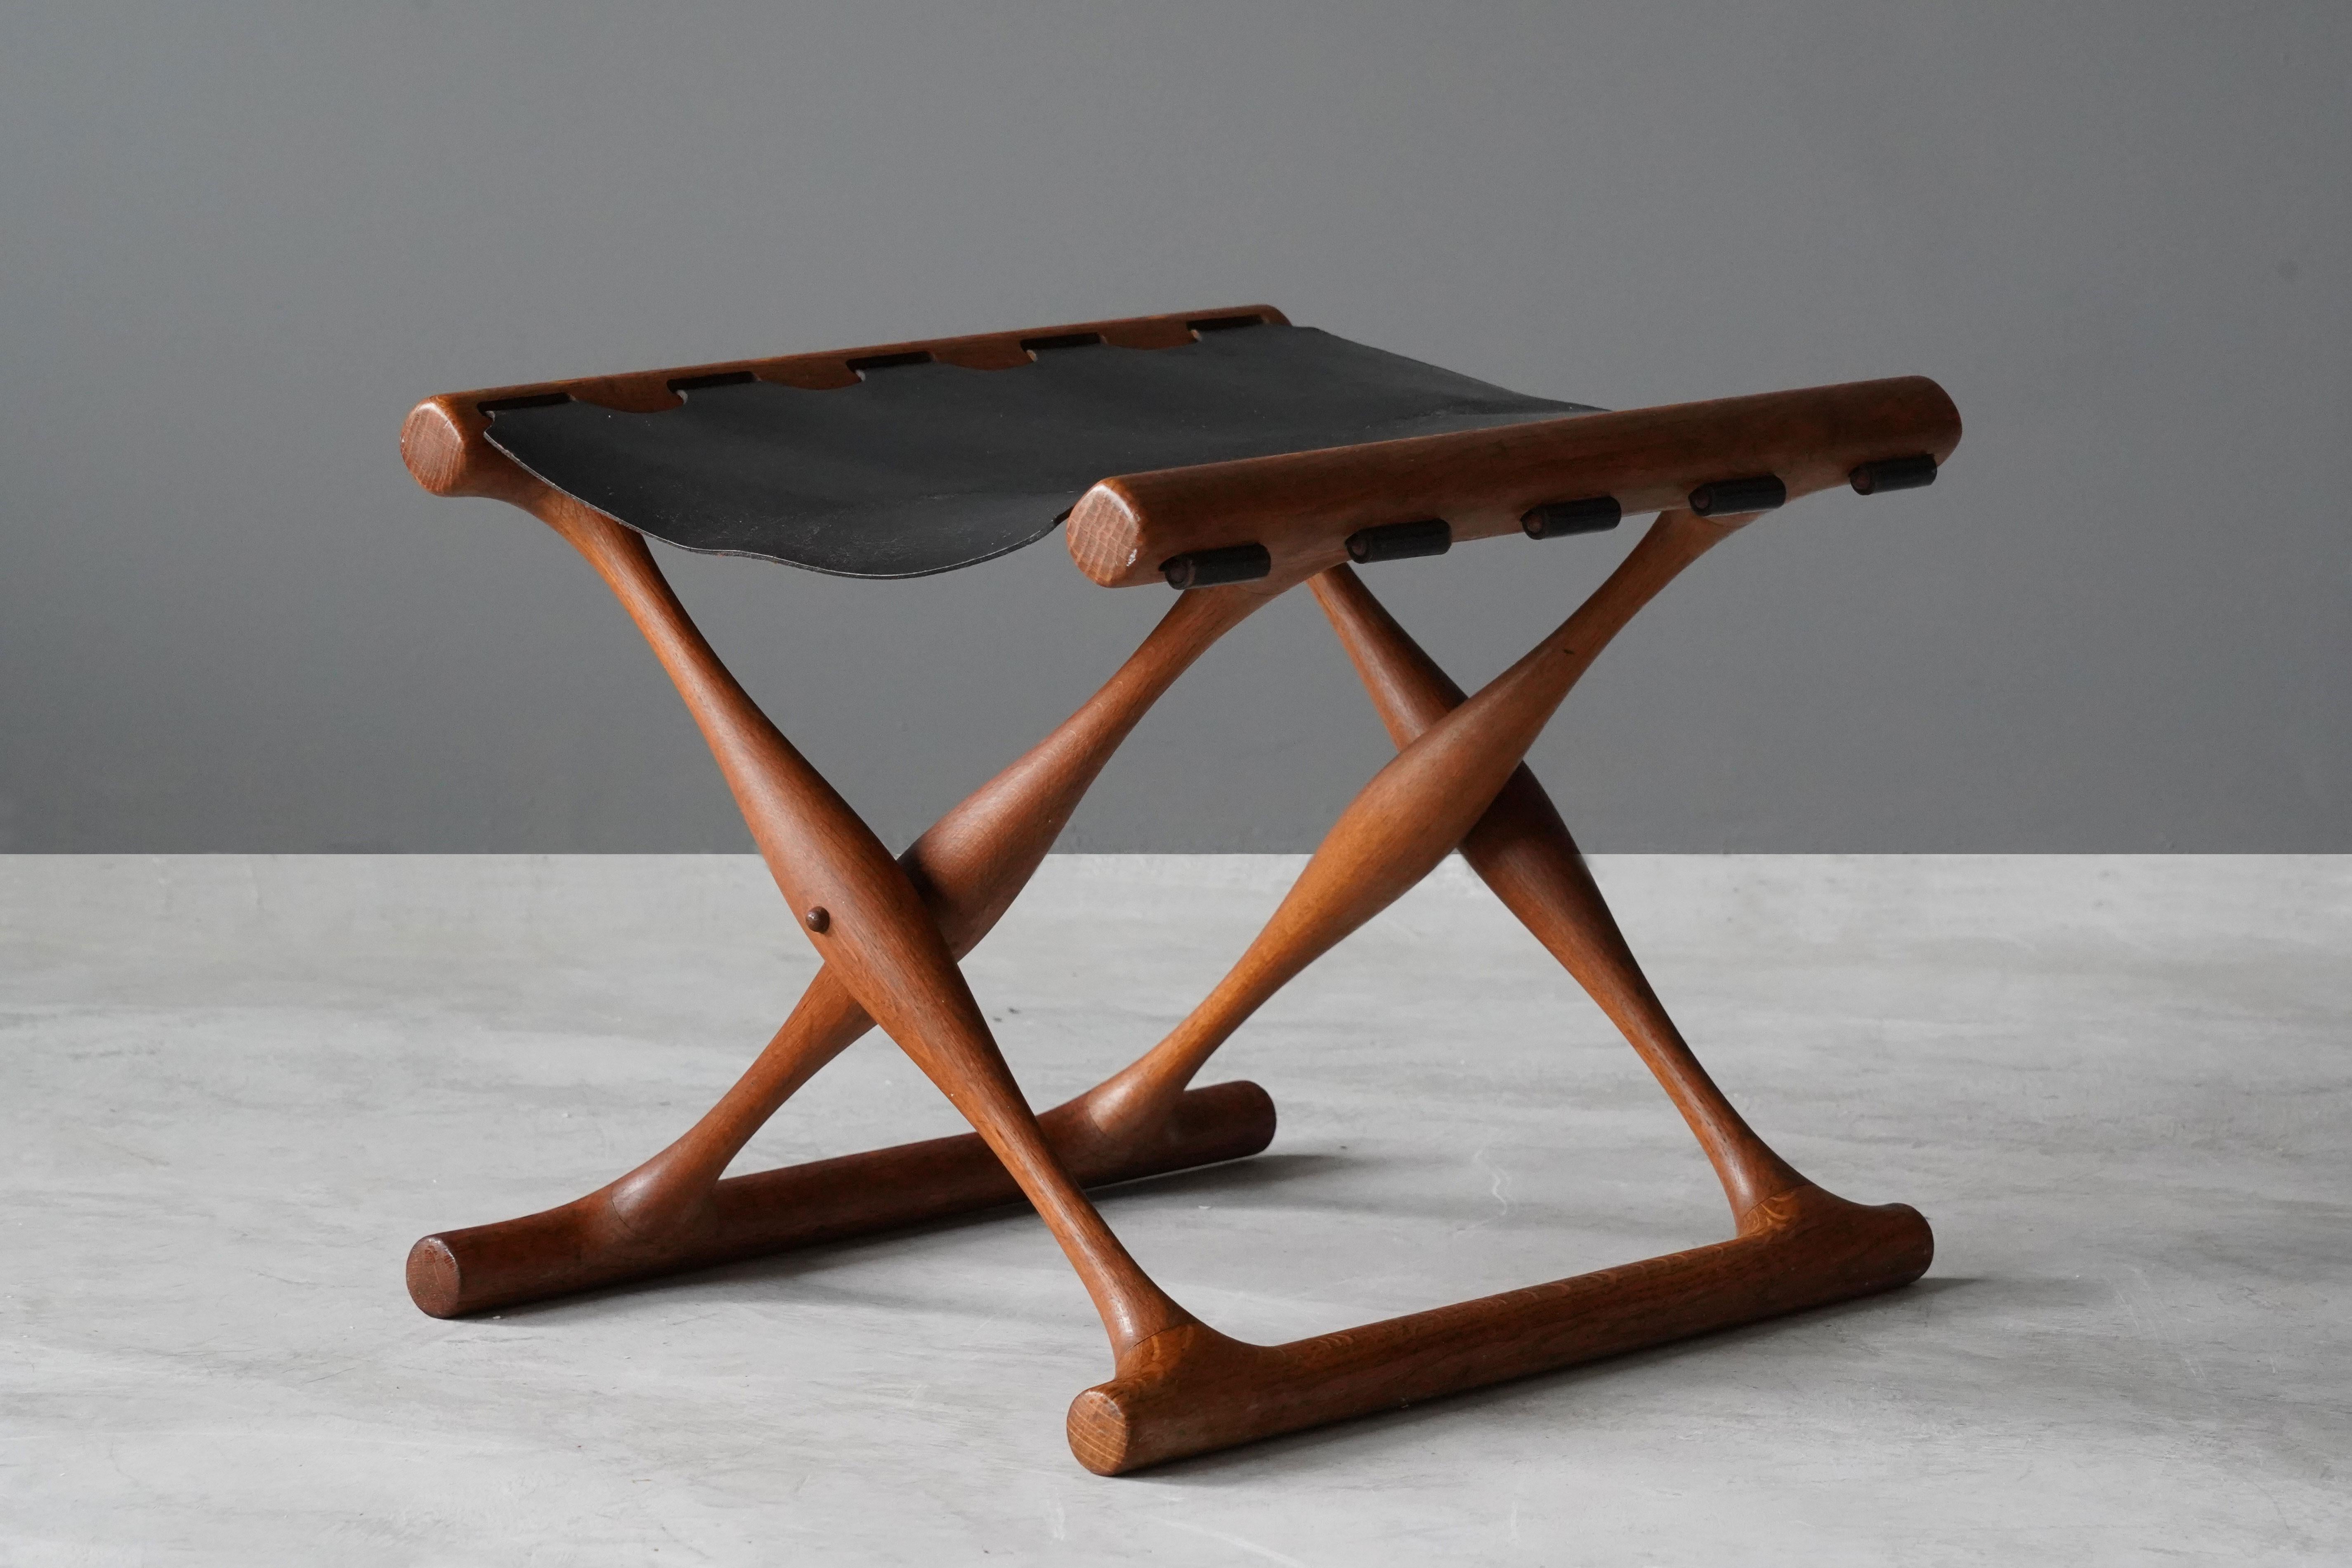 An early production “Guldhøj” folding stool, designed by Poul Hundevad and produced in the studio of the artist. Executed in finely sculpted oak and original black leather. 

Other designers of the period include Kaare Klint, Ole Wanscher, Finn